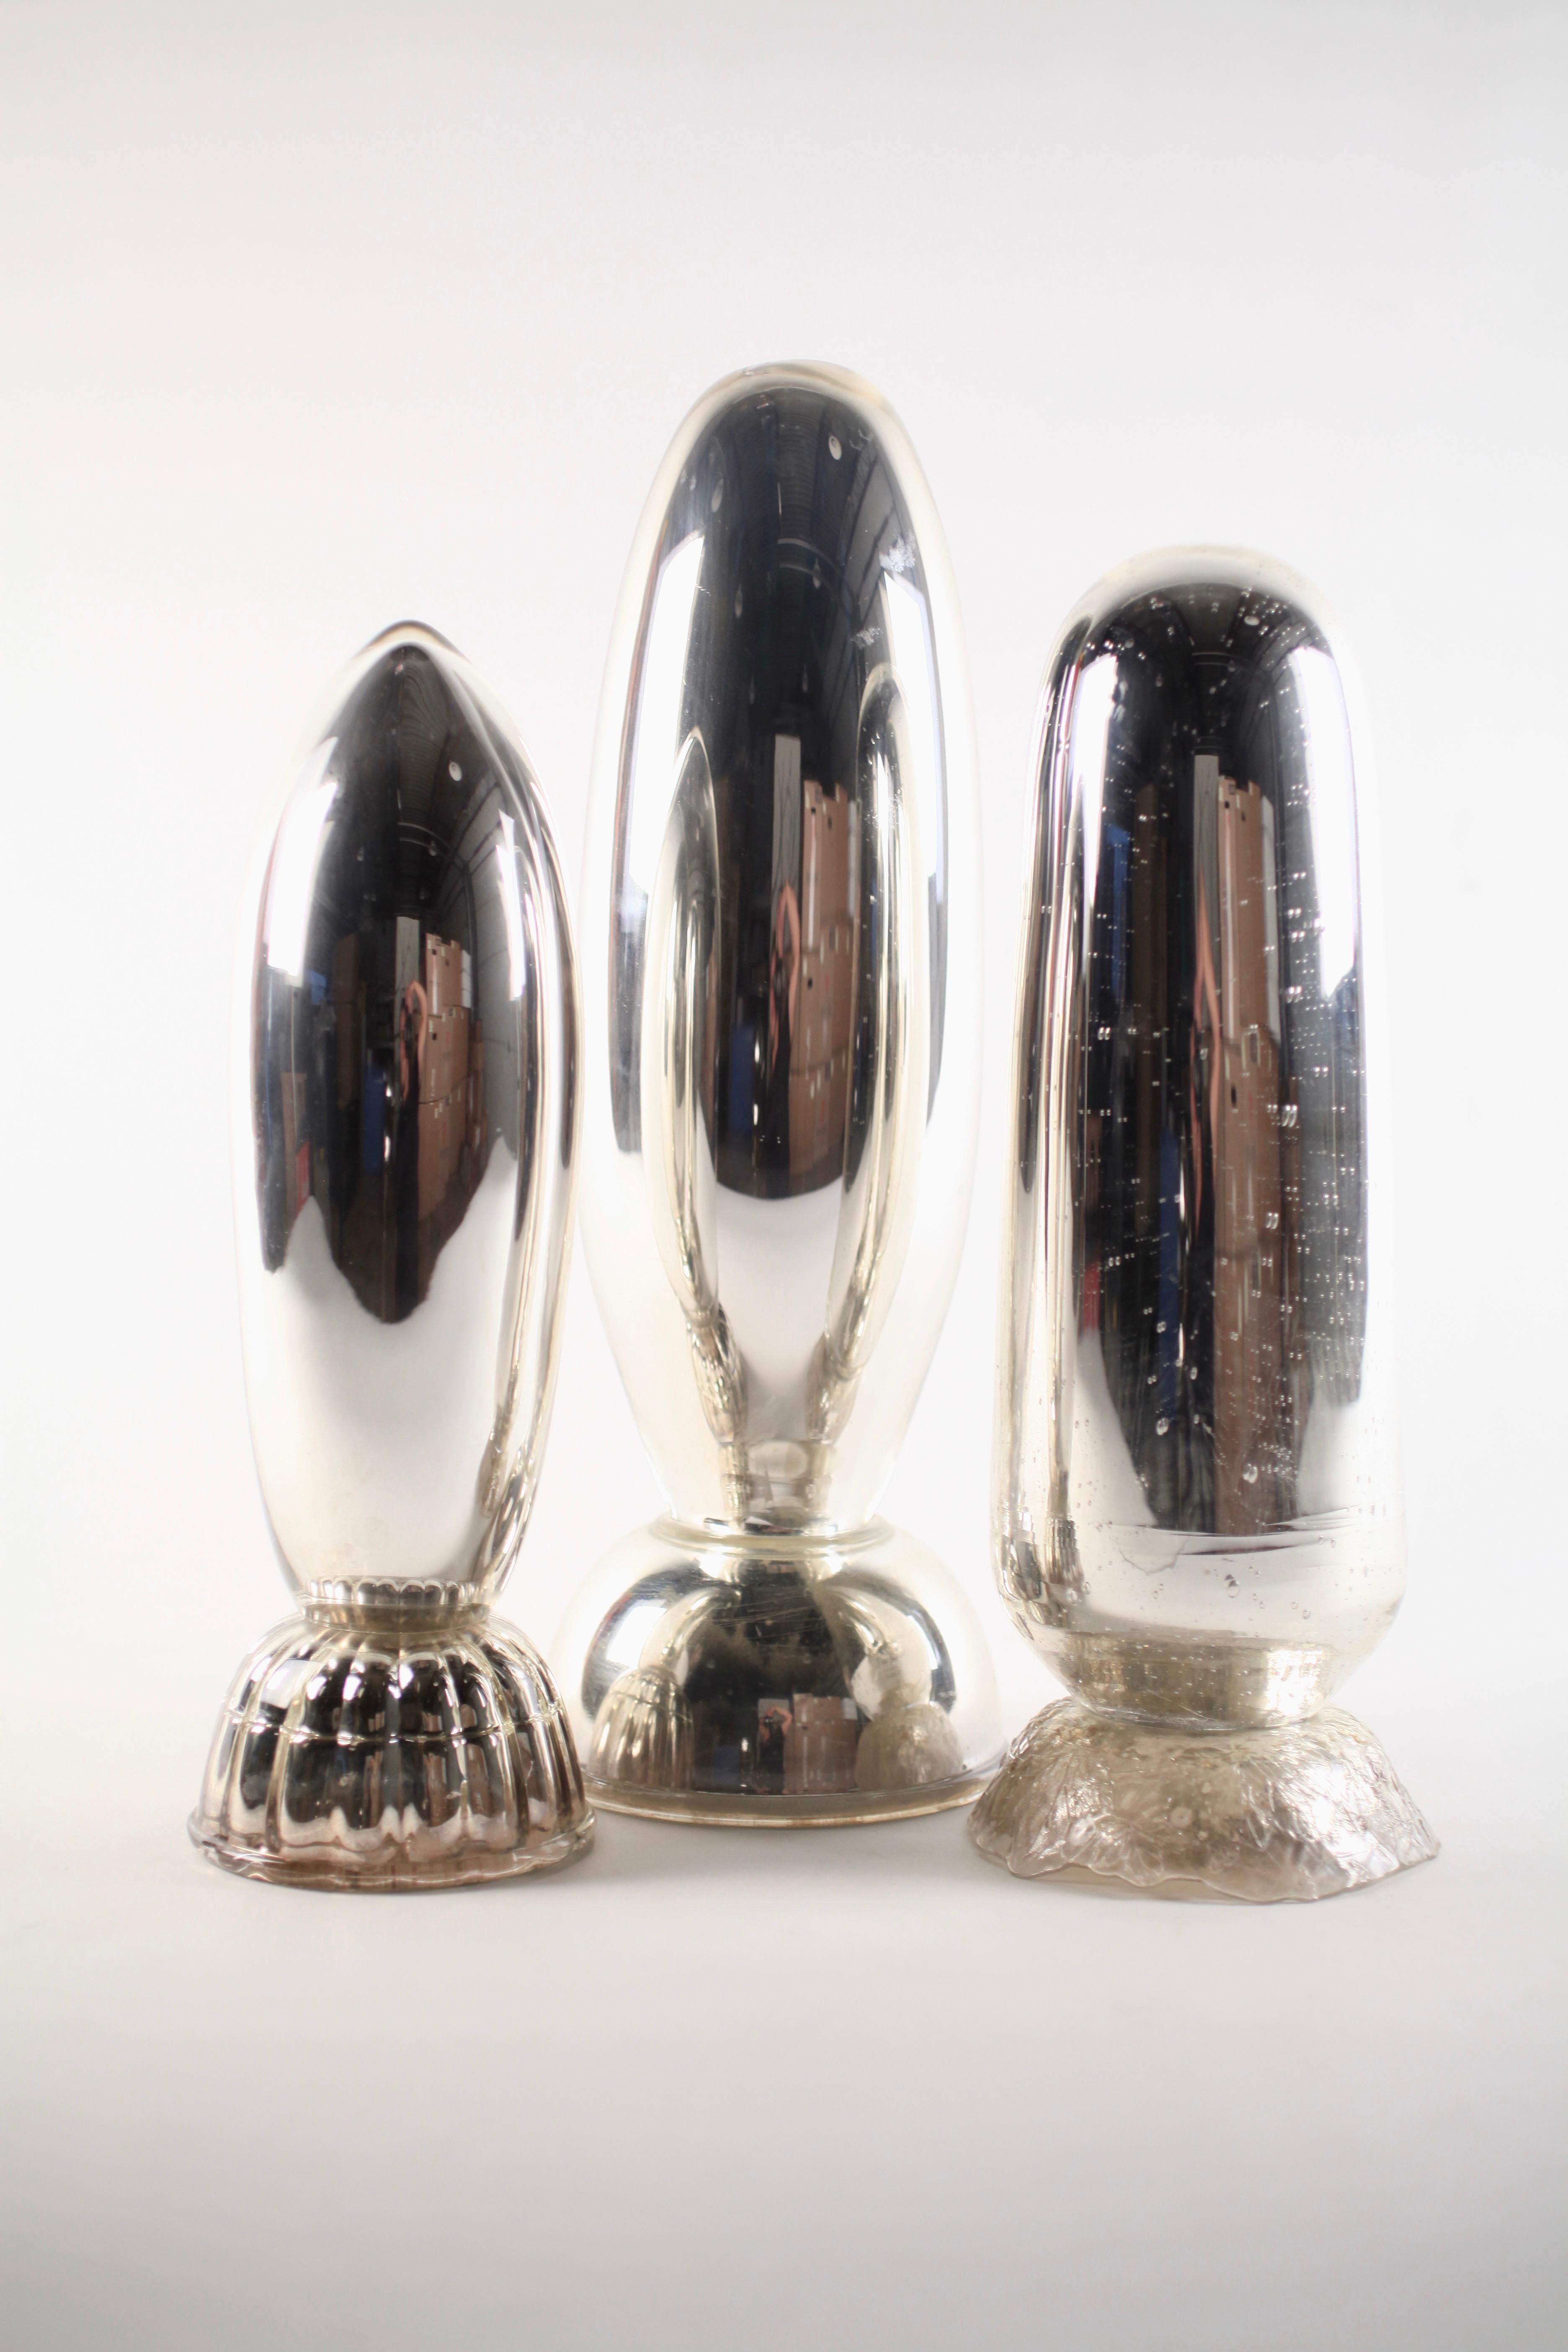 Hand blown and mirrored bomb trio #3, Sculptures by Elizabeth Lyons 2003-2010
These limited-edition sculptural pieces began as components of a larger installation created in 2003. Each piece is hand blown, some with found glass components added,